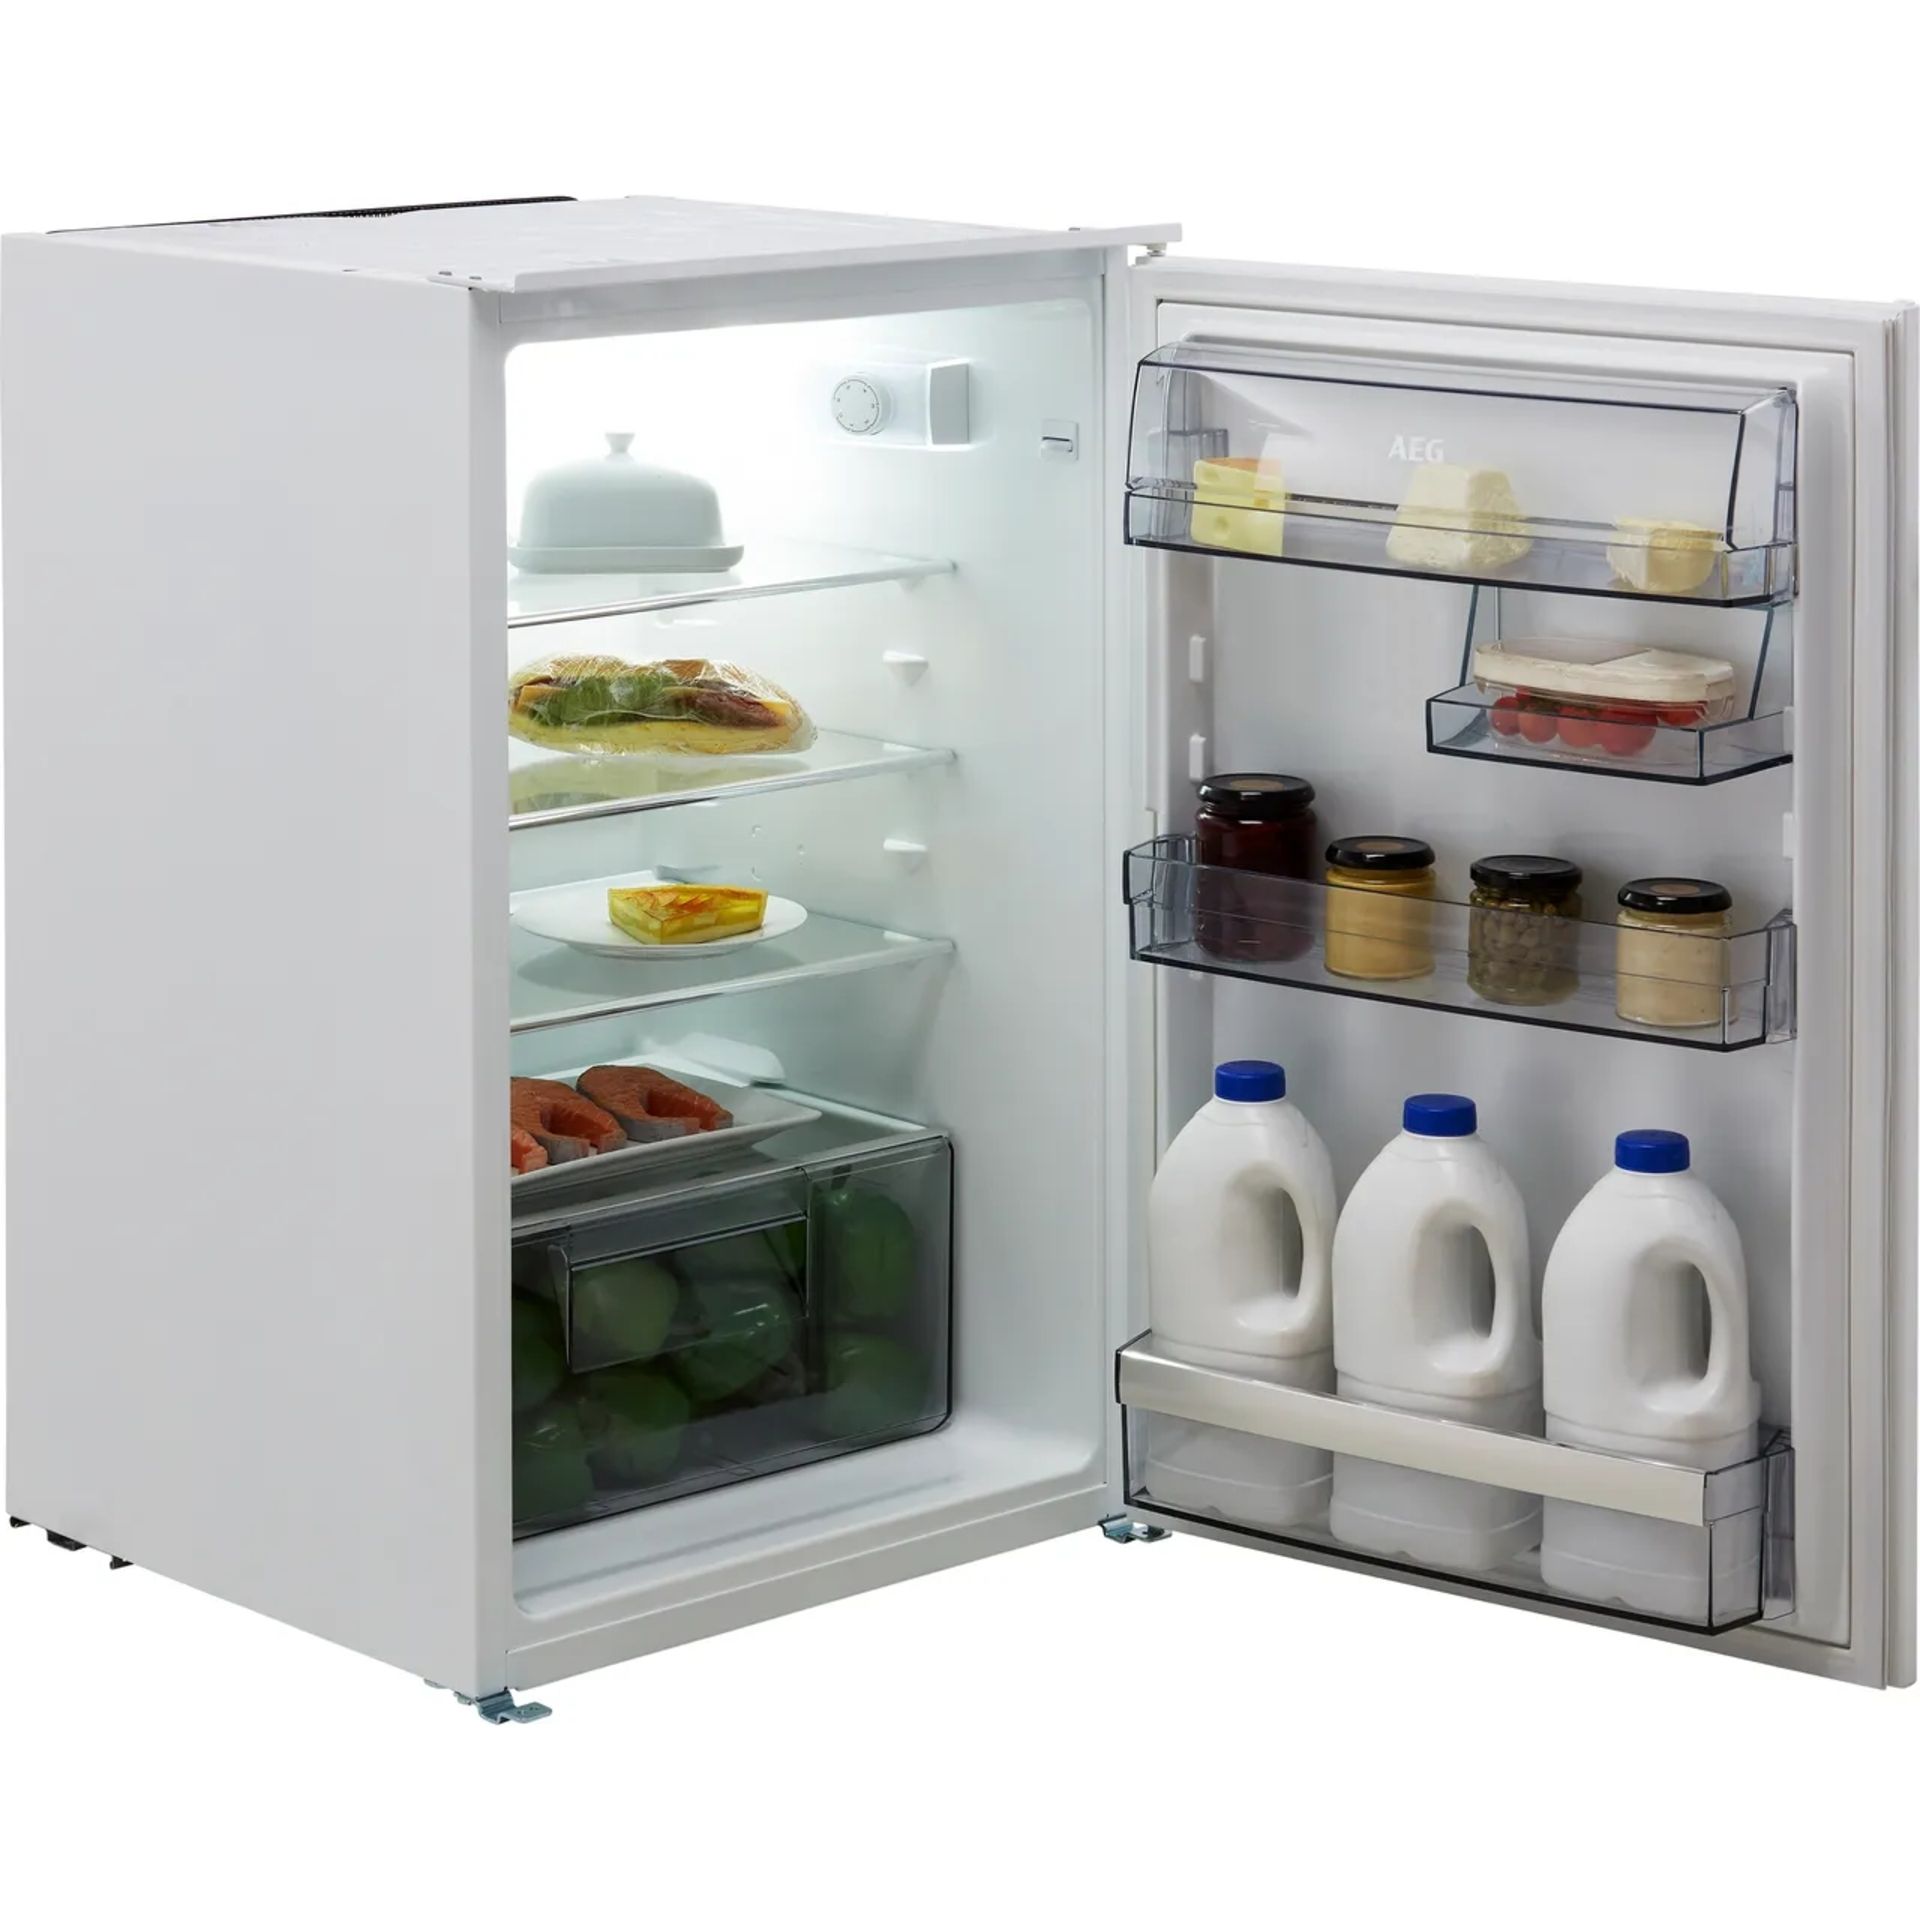 AEG SKE588F1AS Integrated Upright Fridge - - White - H/S. RRP £849.00. If you’re looking for a